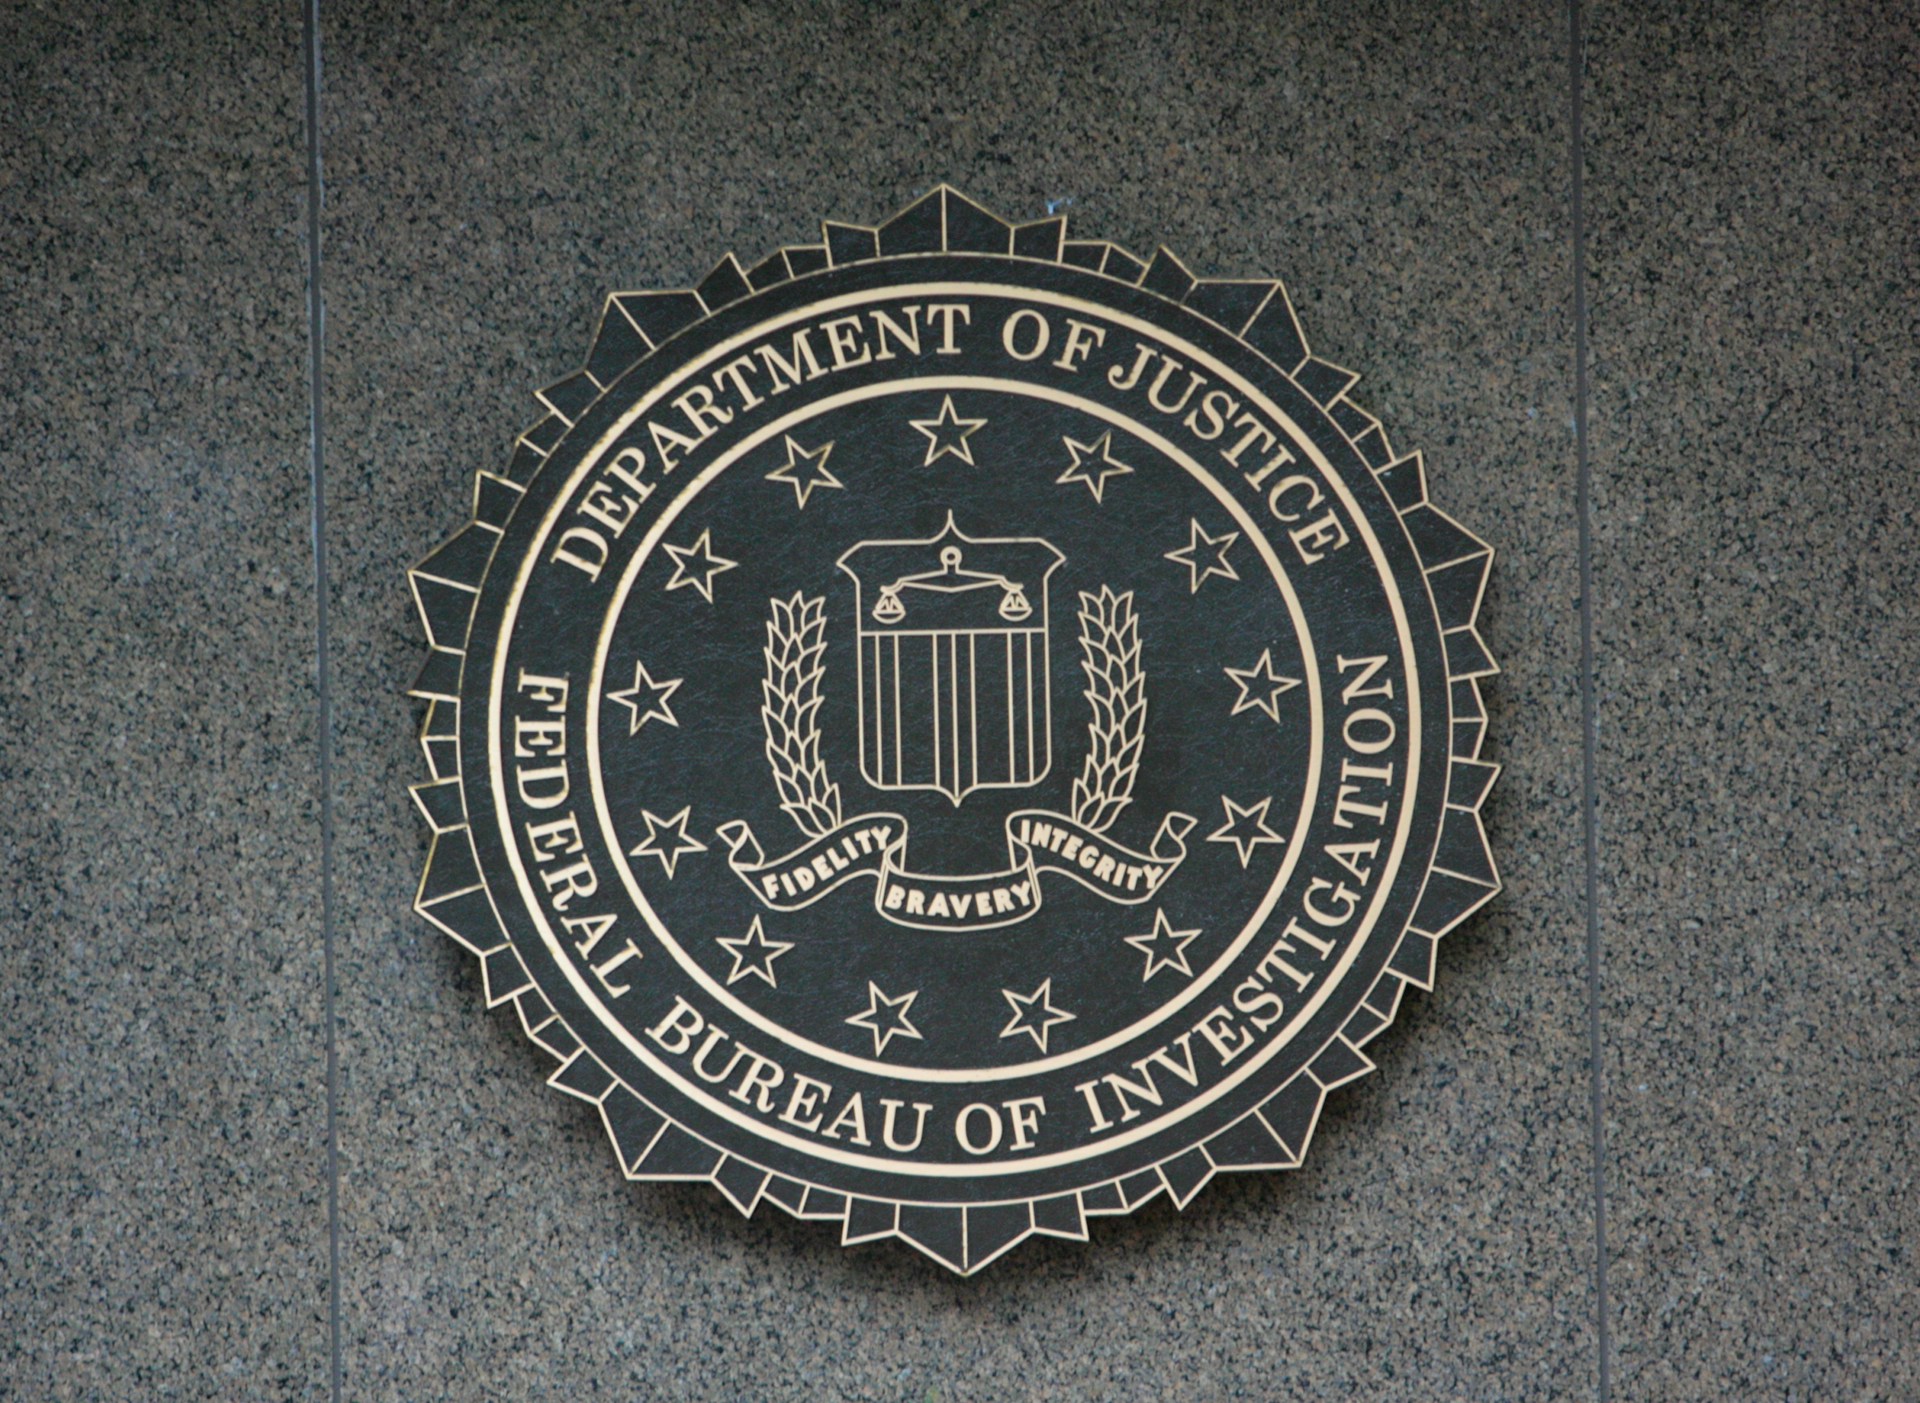 The FBI logo on a wall plaque